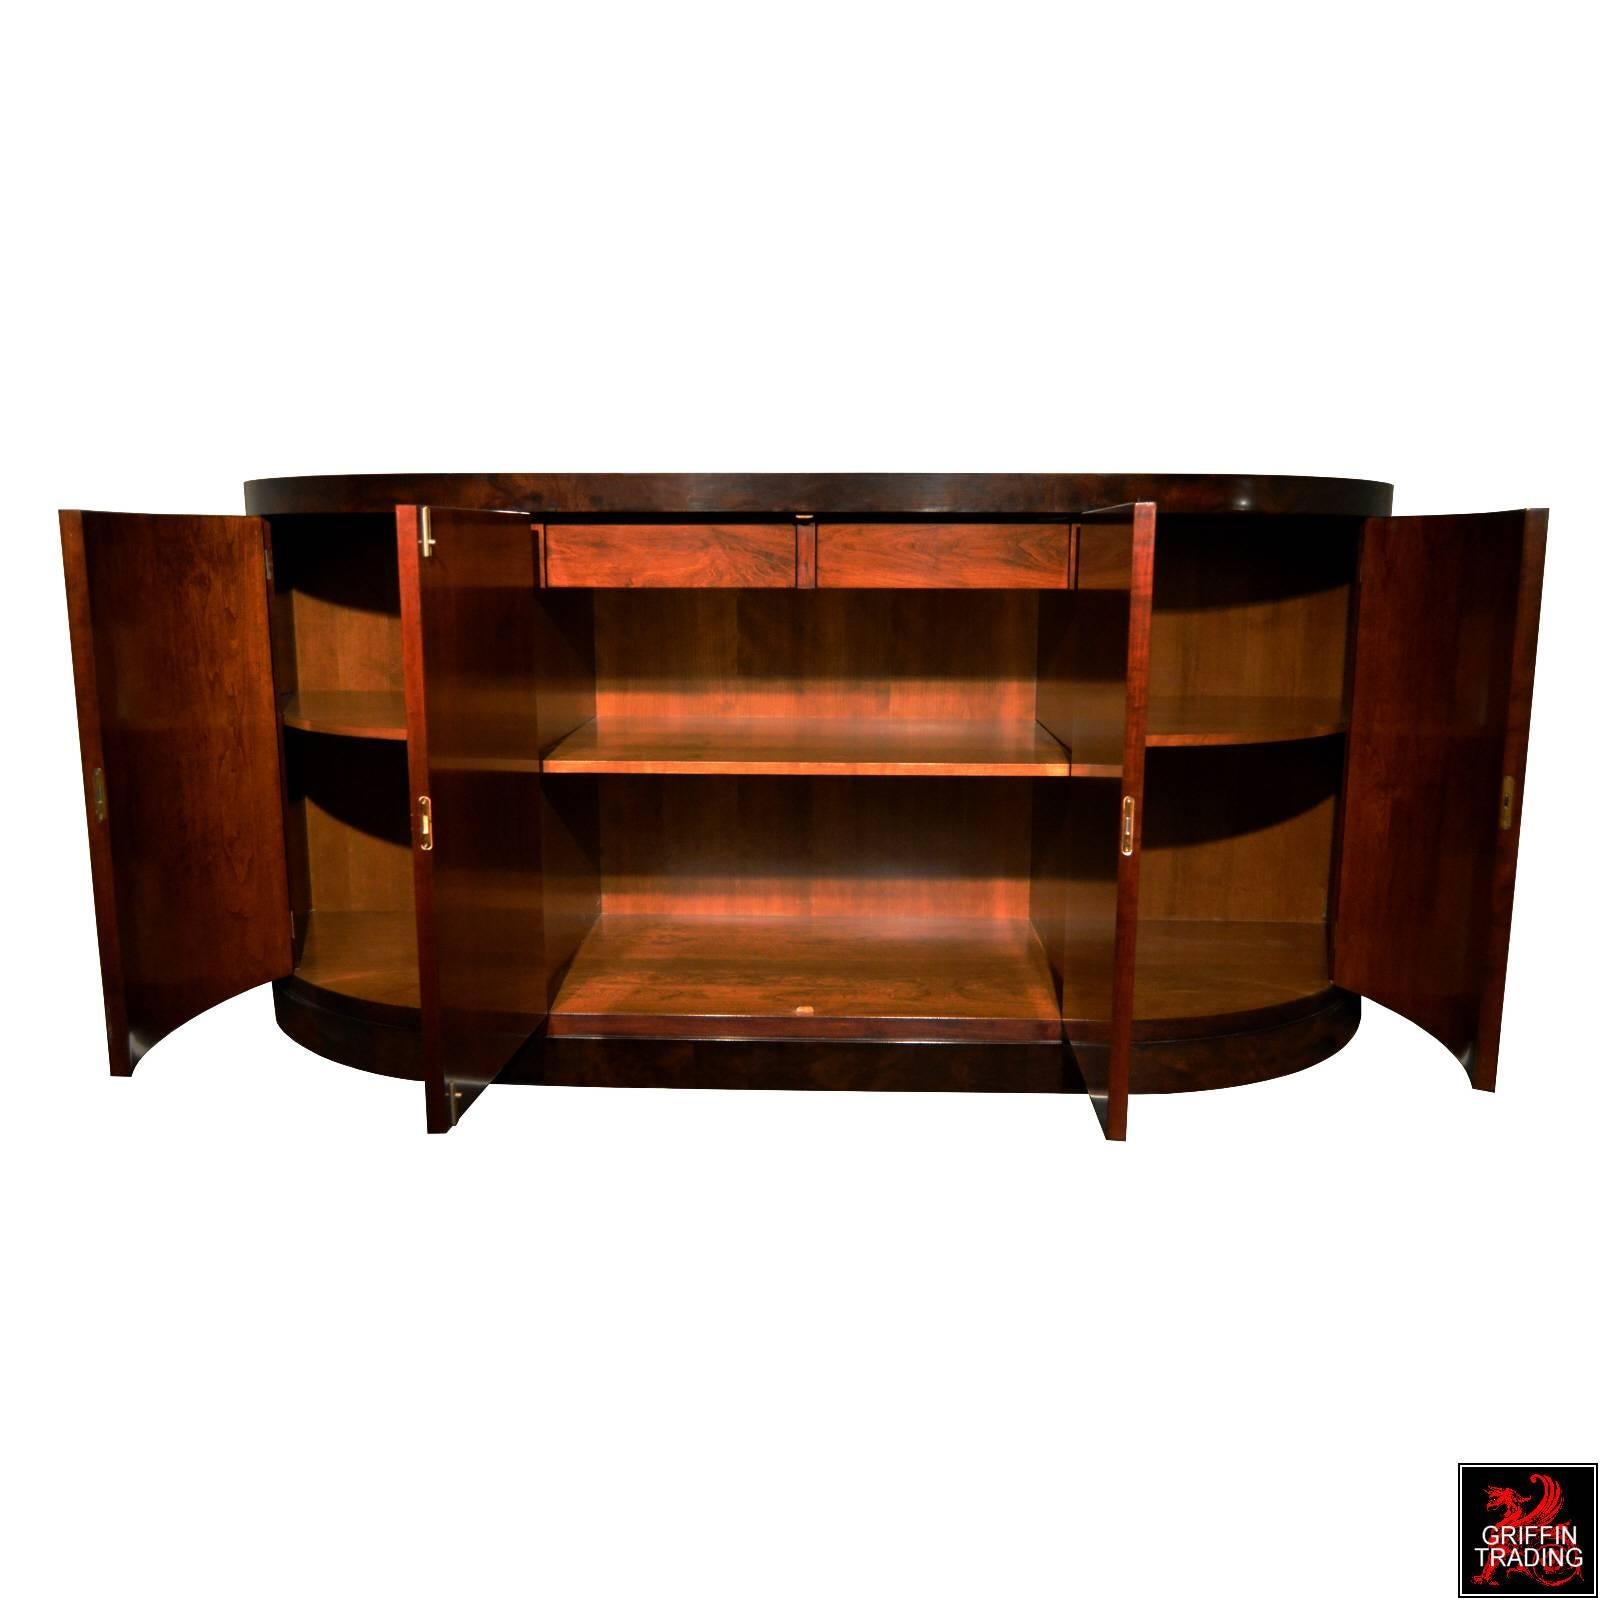 French Style Burl Walnut Sideboard Cabinet by William Switzer In Excellent Condition For Sale In Dallas, TX